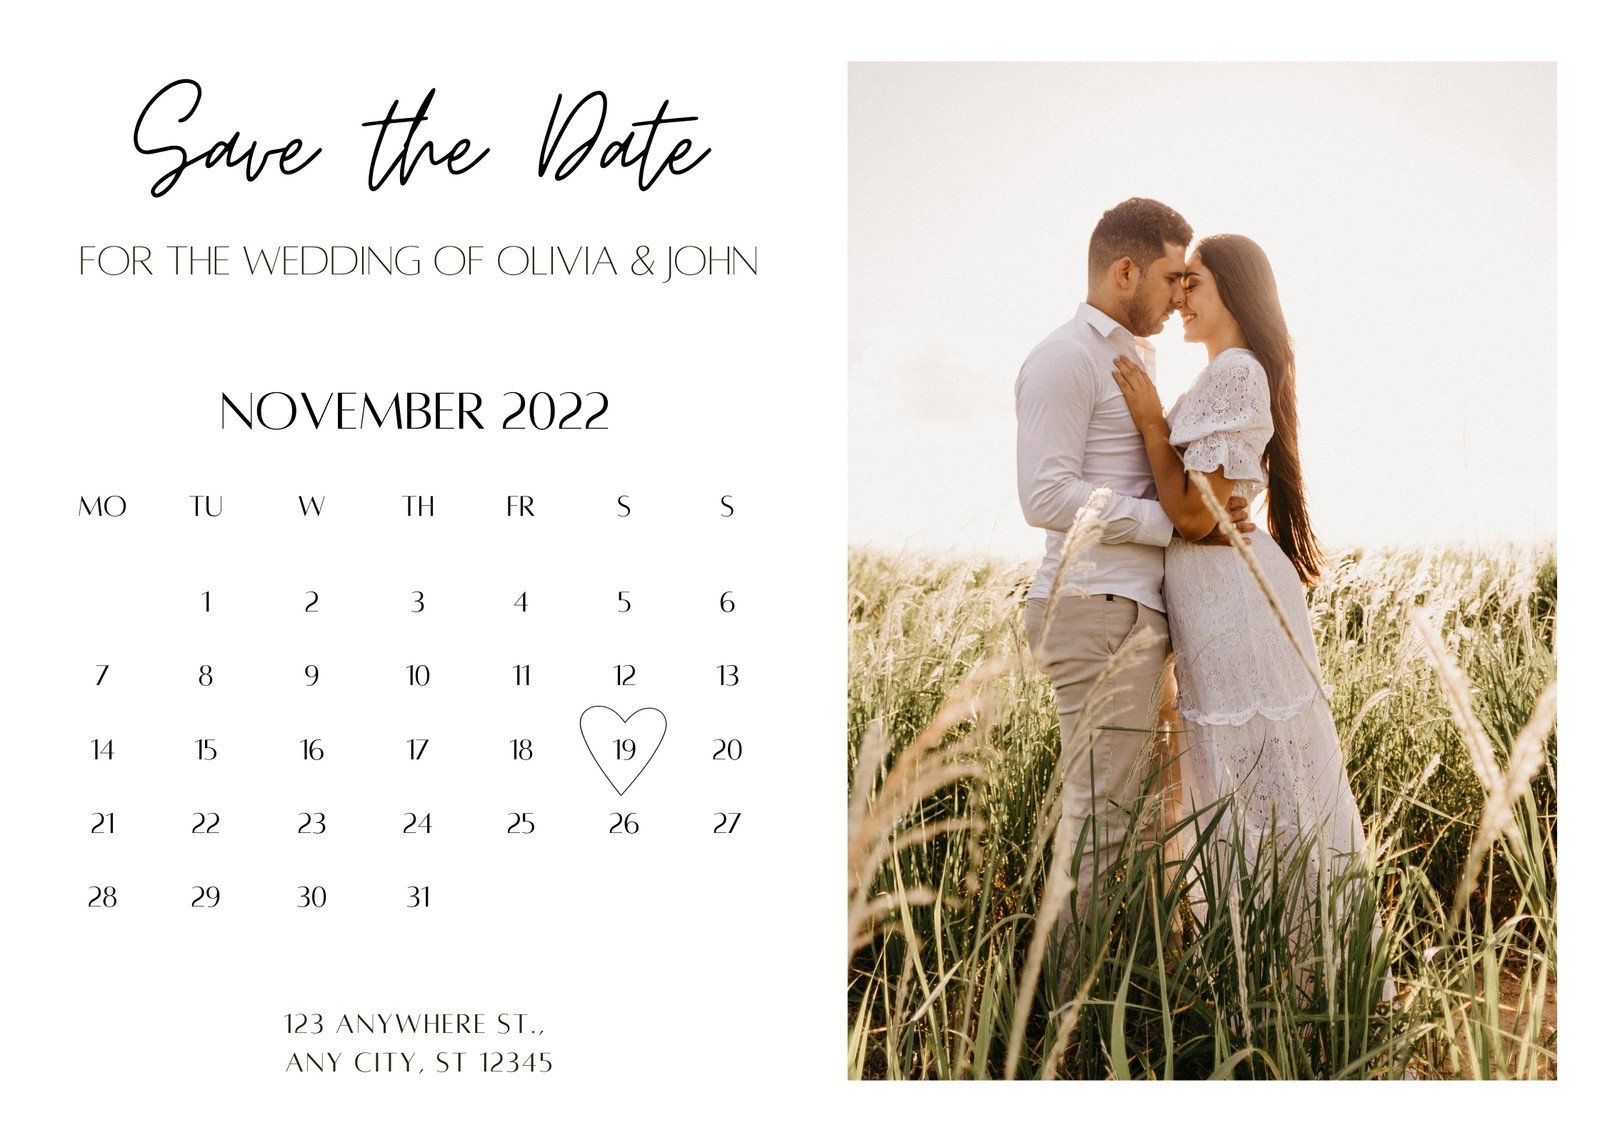 Free And Customizable Save The Date Templates